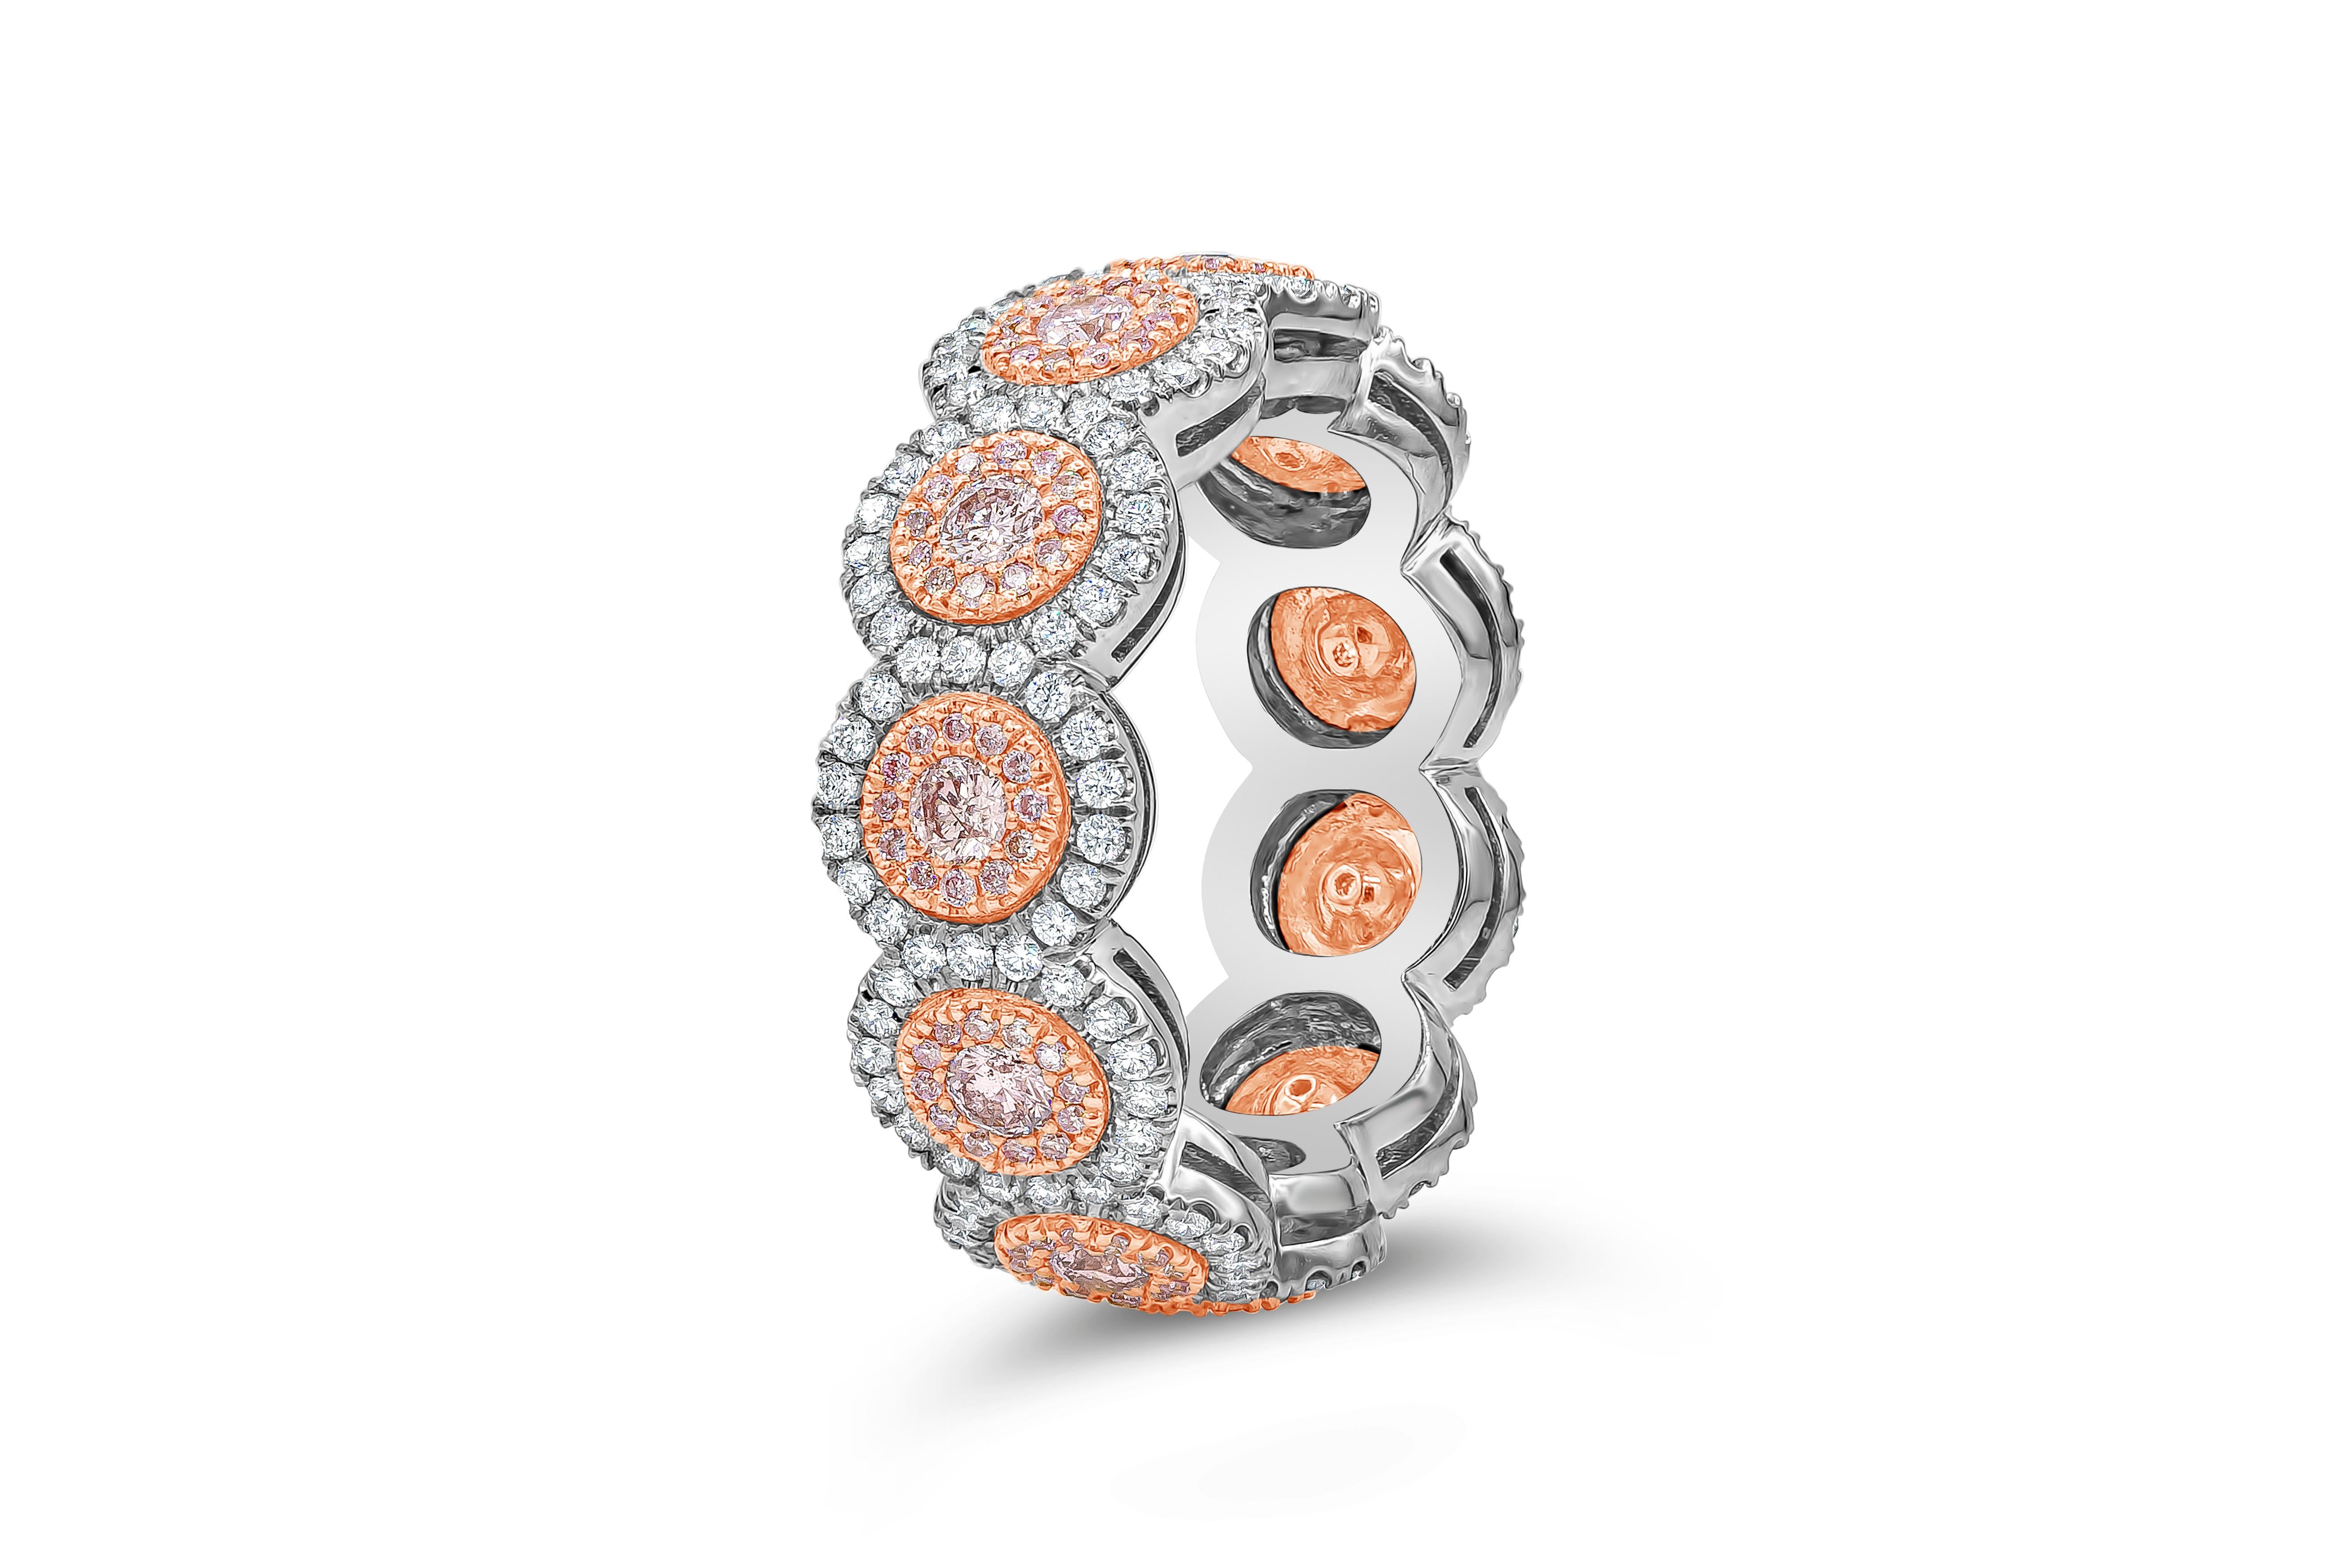 A unique eternity ring featuring 11 round pink diamonds, elegantly set in a double halo design encrusted with pink and white diamonds. Pink diamonds weigh 0.86 carats total, set in 18K Rose Gold, White diamonds weigh 0.63 carats total. Made with